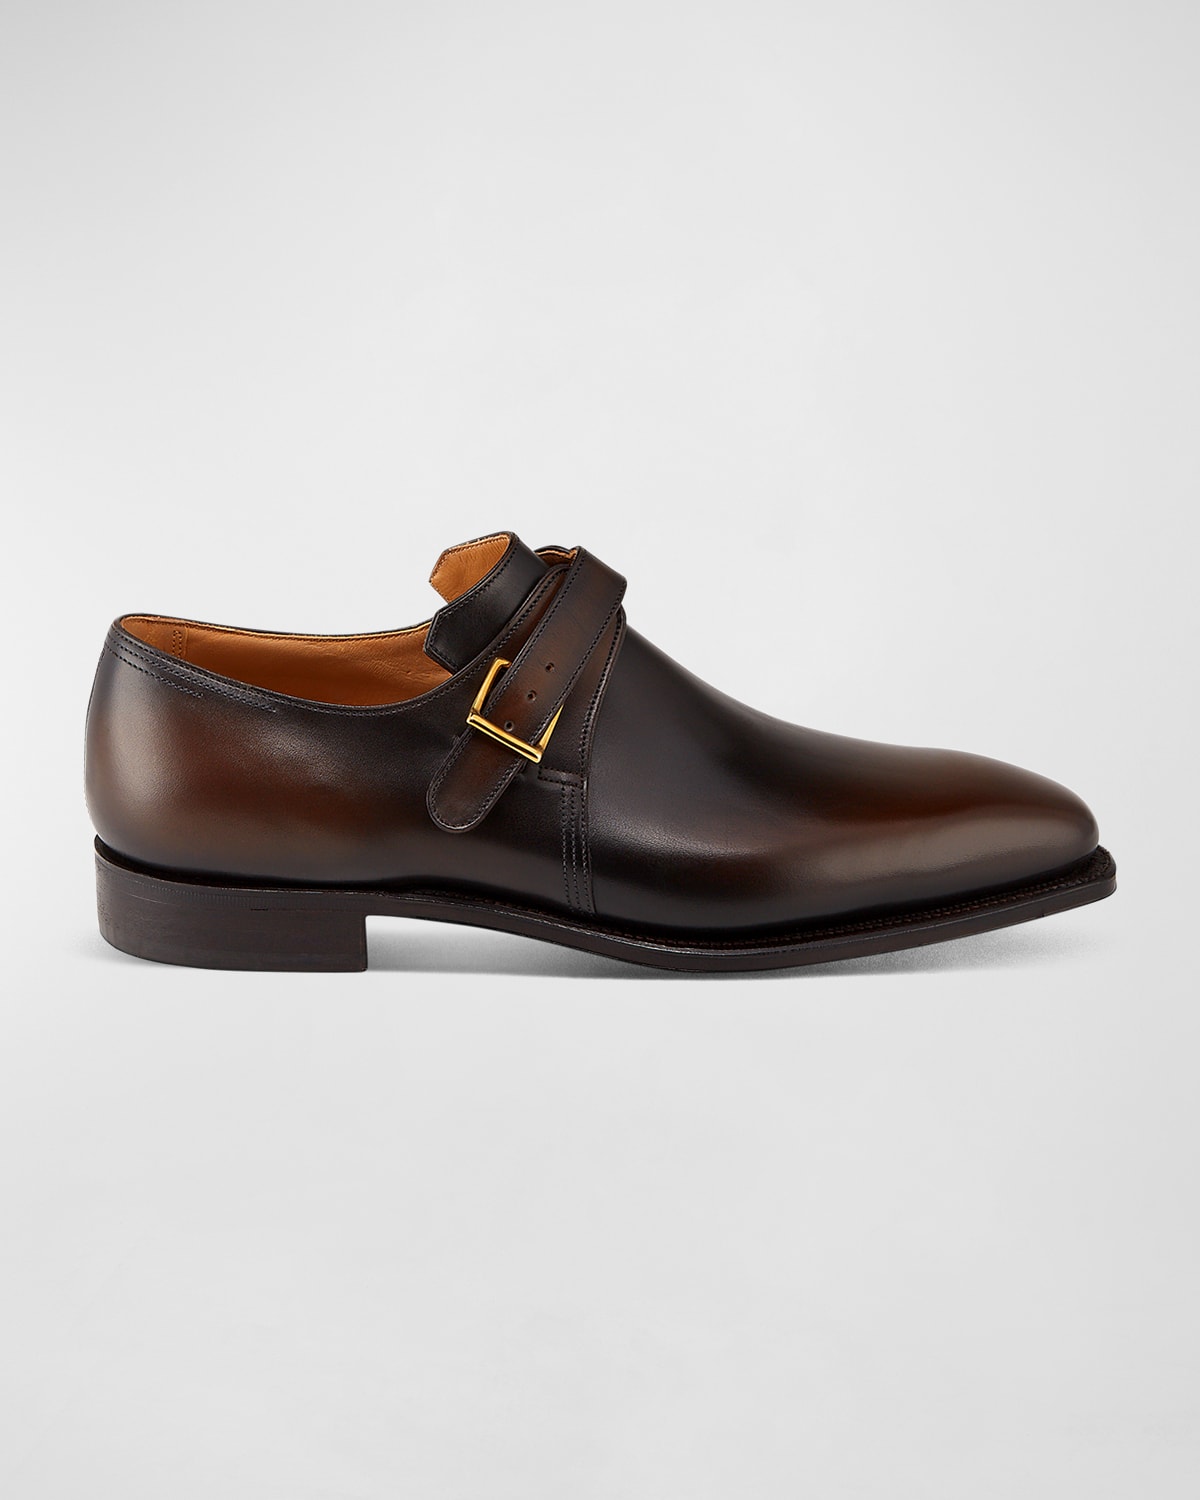 Mens Shoes Slip-on shoes Monk shoes Tom Ford Burnished Leather Monk Strap Shoes in Brown for Men 